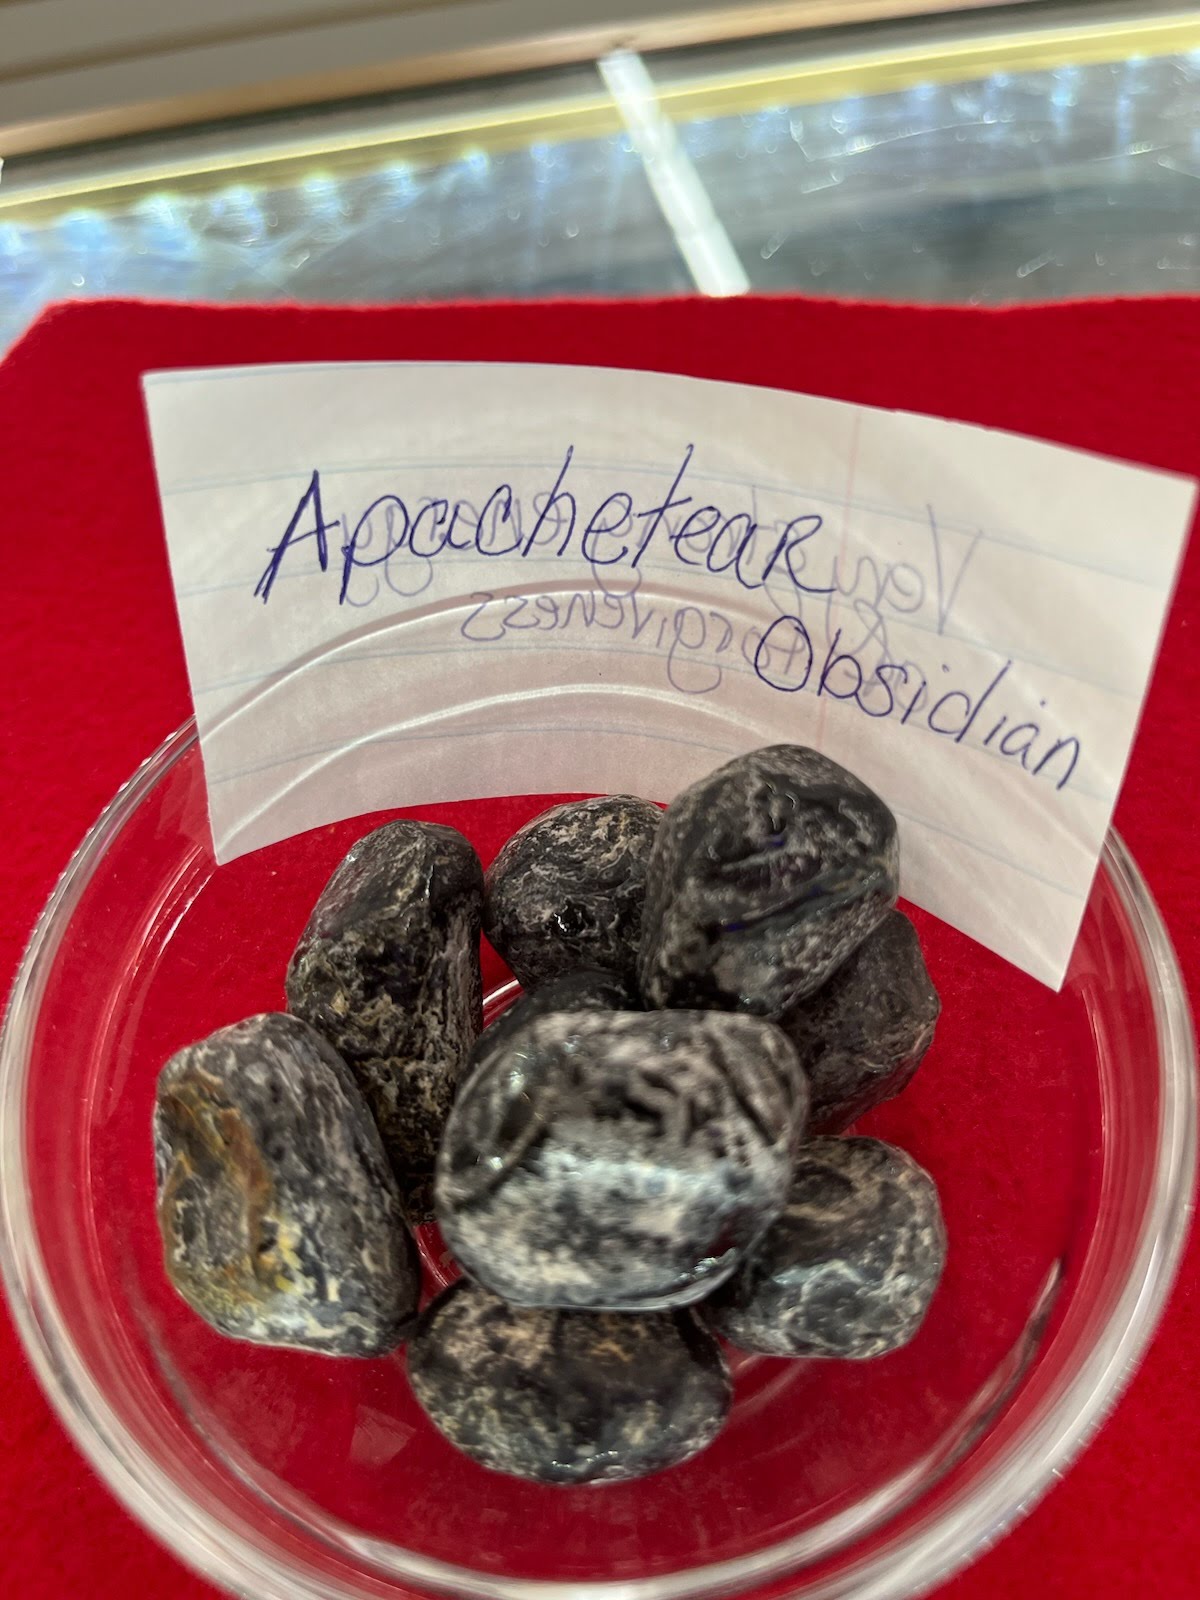 A bowl of black and white rocks with a note.